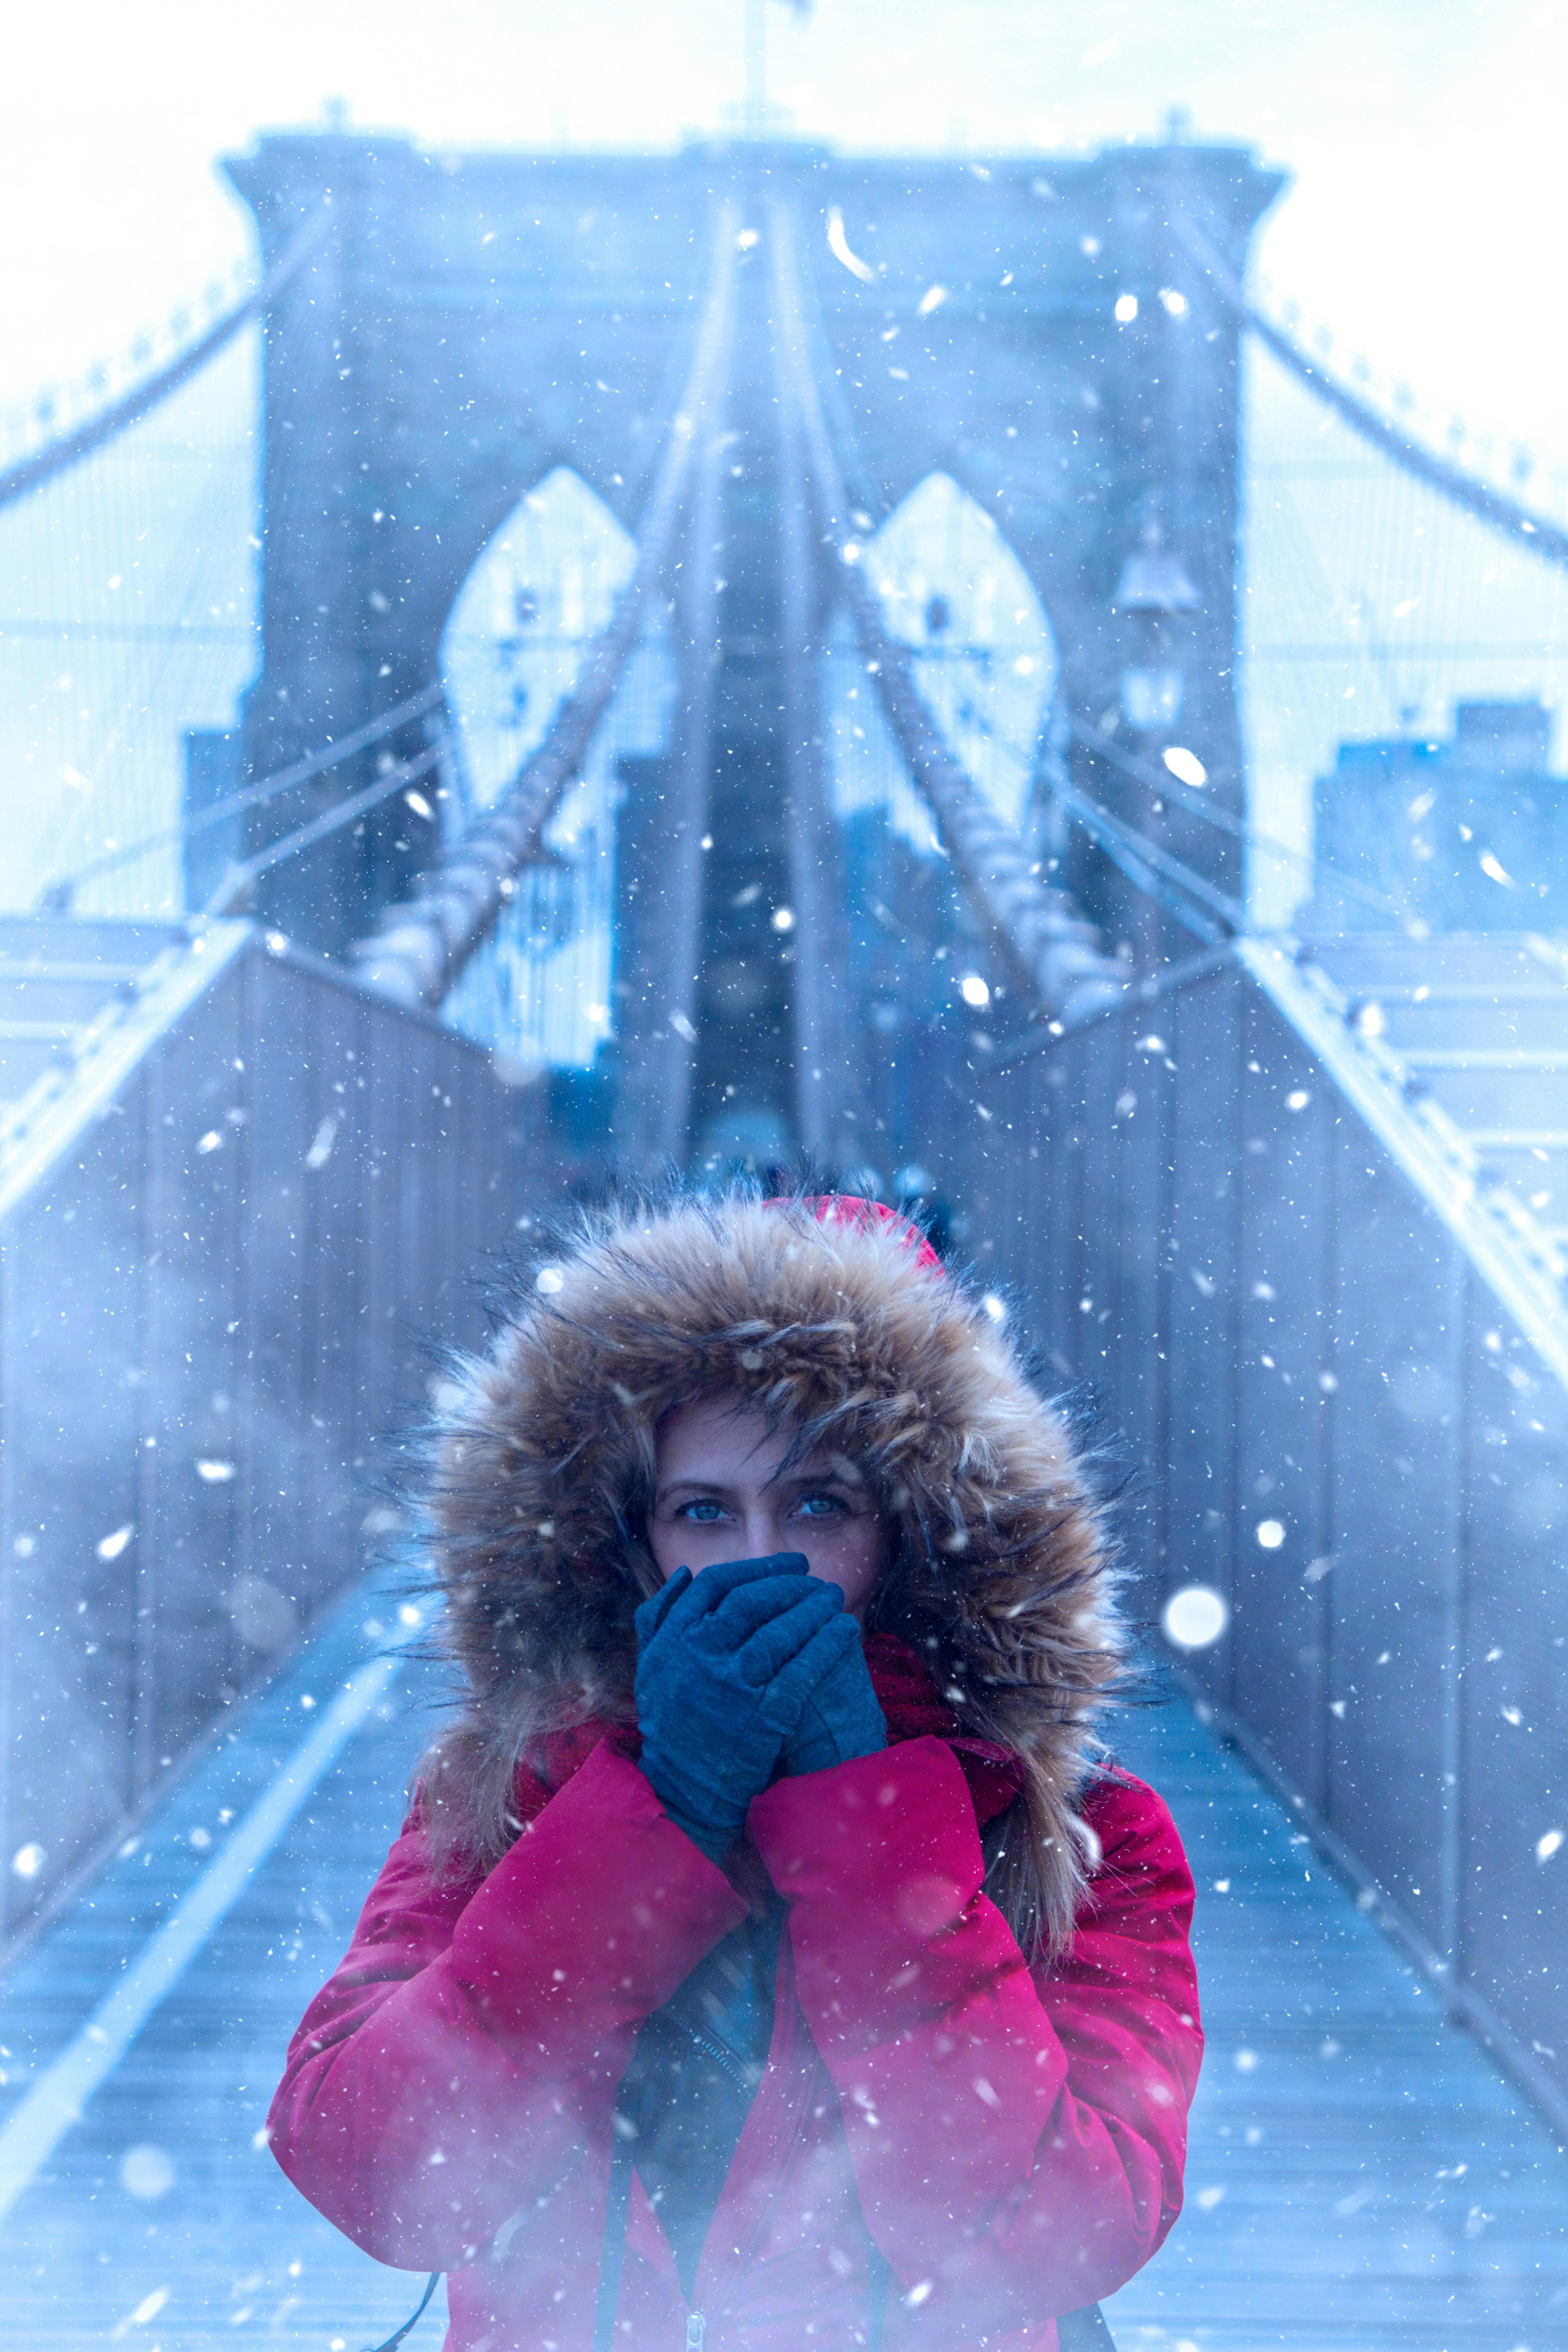 woman wearing red parka jacket while standing on brooklyn bridge